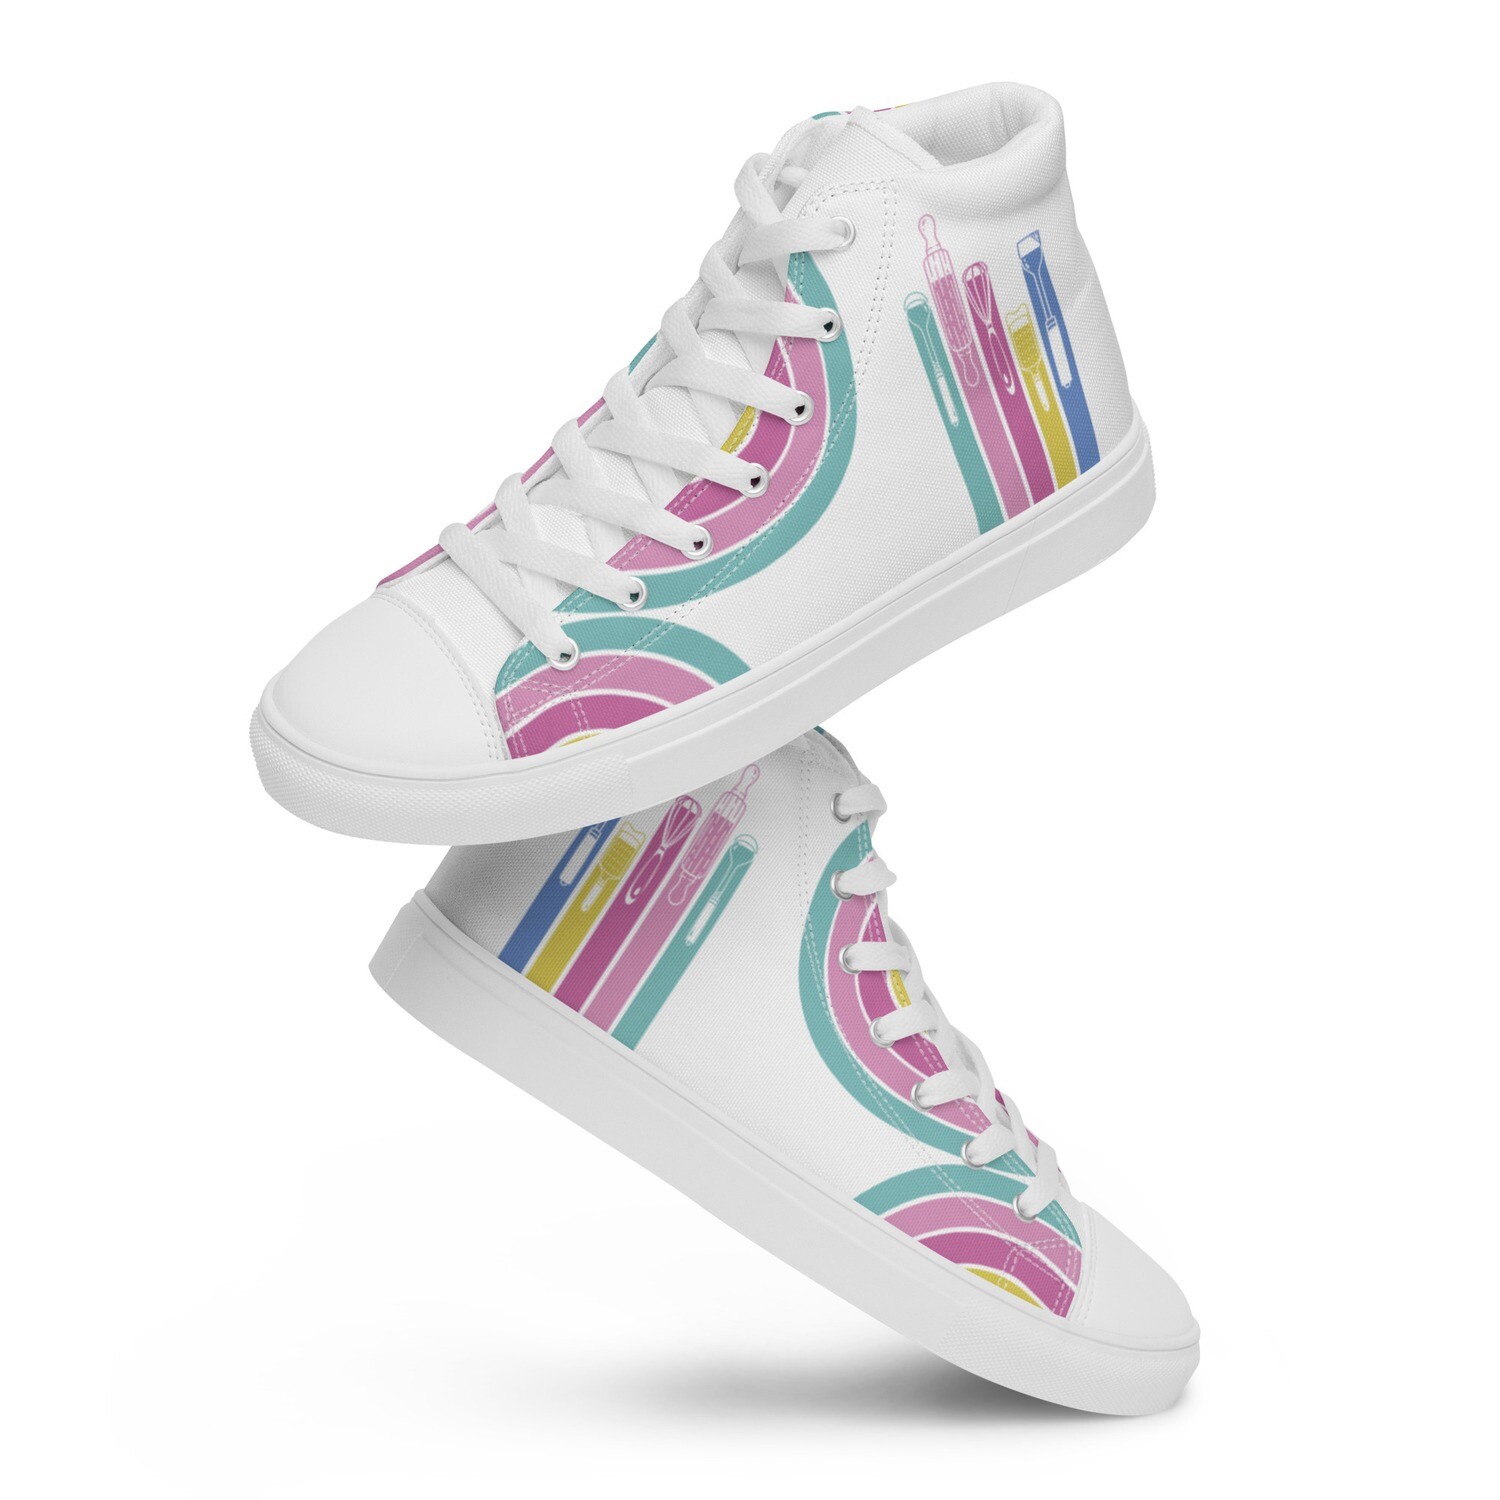 Woo Hoo! It's Bake Day! Women’s high top canvas shoes